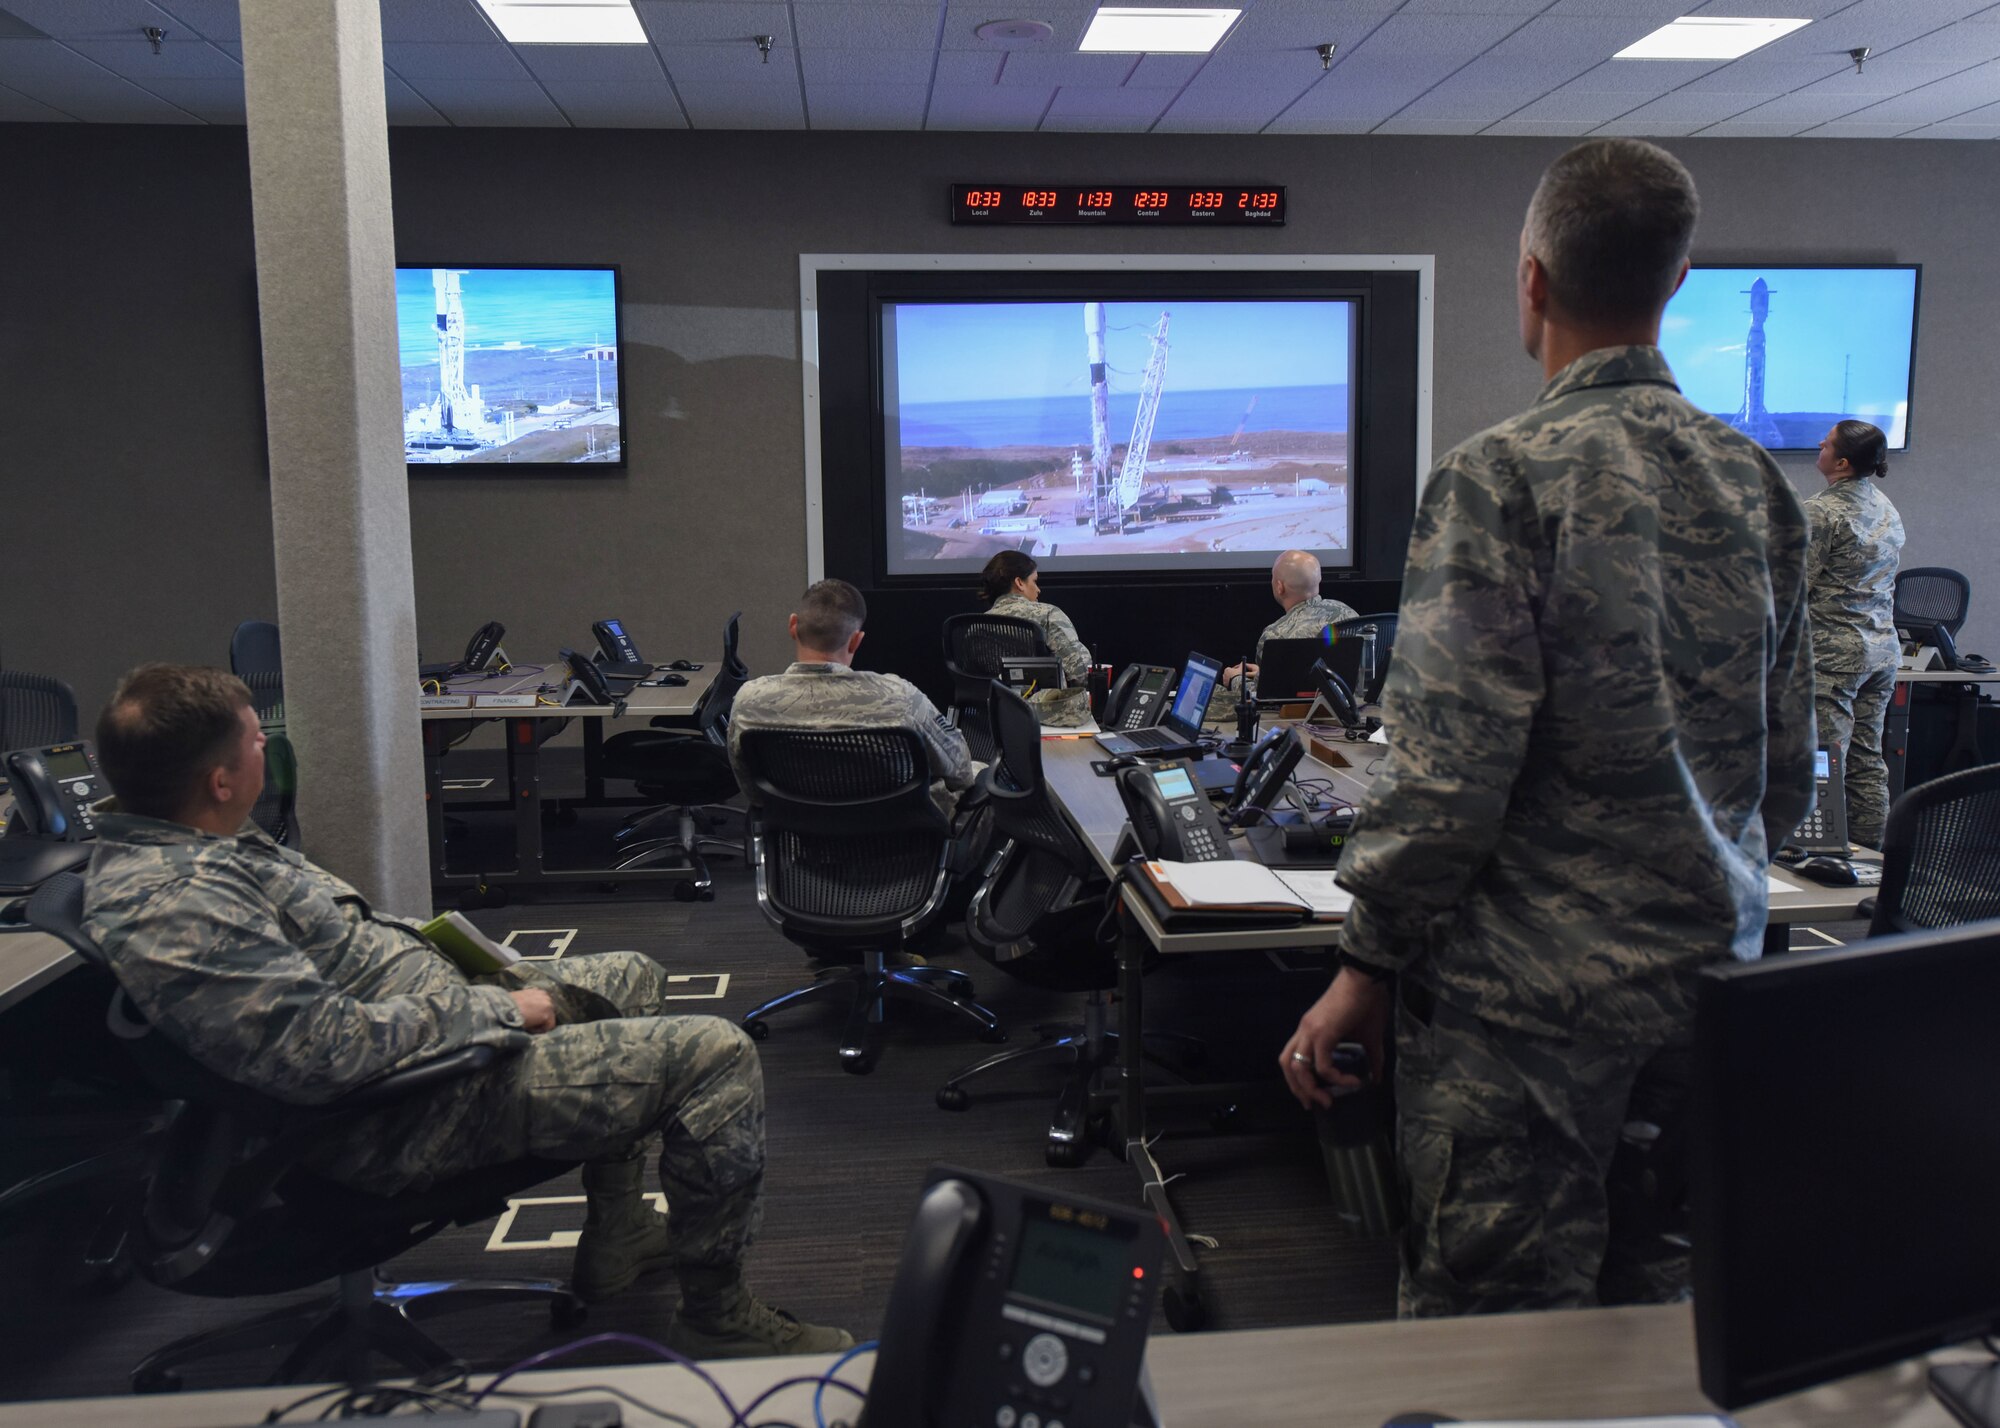 Col. Michael Hunsberger, 30th Mission Support Group commander, and Lt. Col. Jason Aftanas, 30th Civil Engineer Squadron commander, watch the Spaceflight SSO-A: SmallSat Express on a SpaceX Falcon 9 rocket at the Emergency Operation Center, here, Dec. 3, 2018 at 10:34 a.m. “The purpose of the Emergency Operations Center is to support the incident commander, who is typically the head of the Fire Department, with any needs they have if an incident were to occur,” said Hunsberger. (U.S. Air Force photo by Airman 1st Class Aubree Milks/Released)